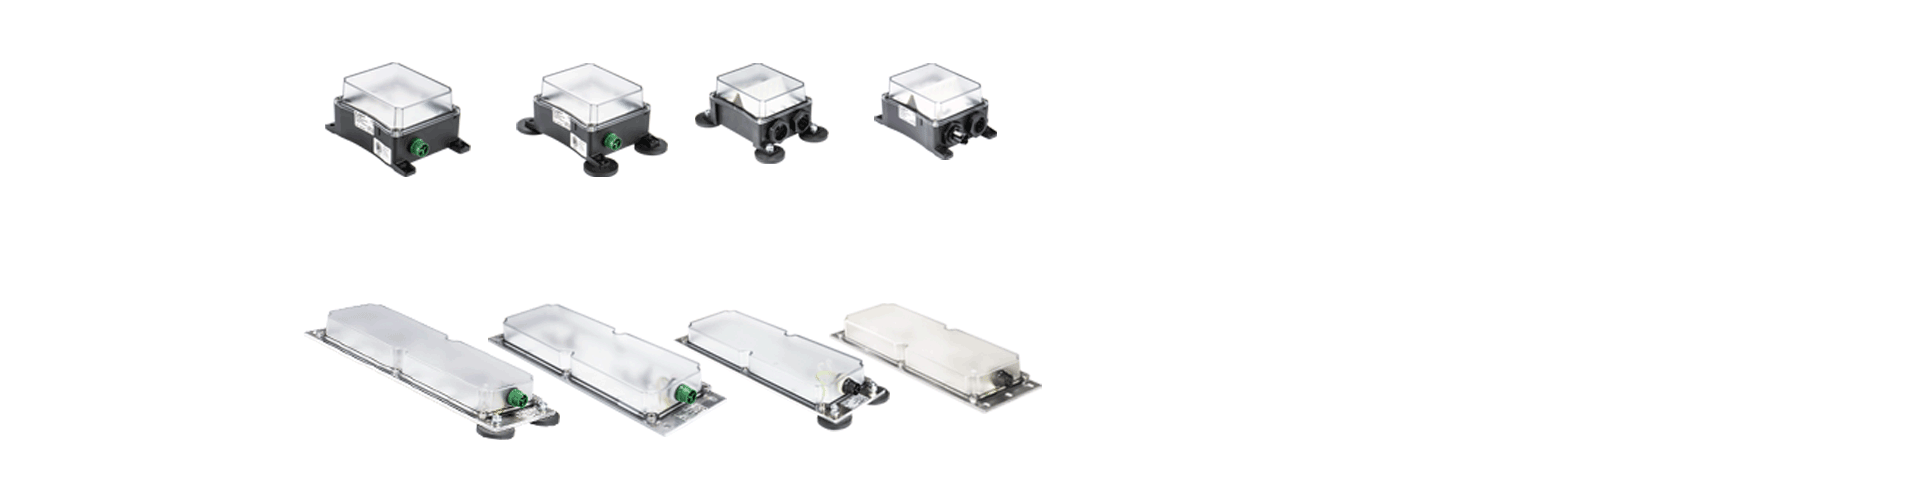 Versions of the podis LED luminaires